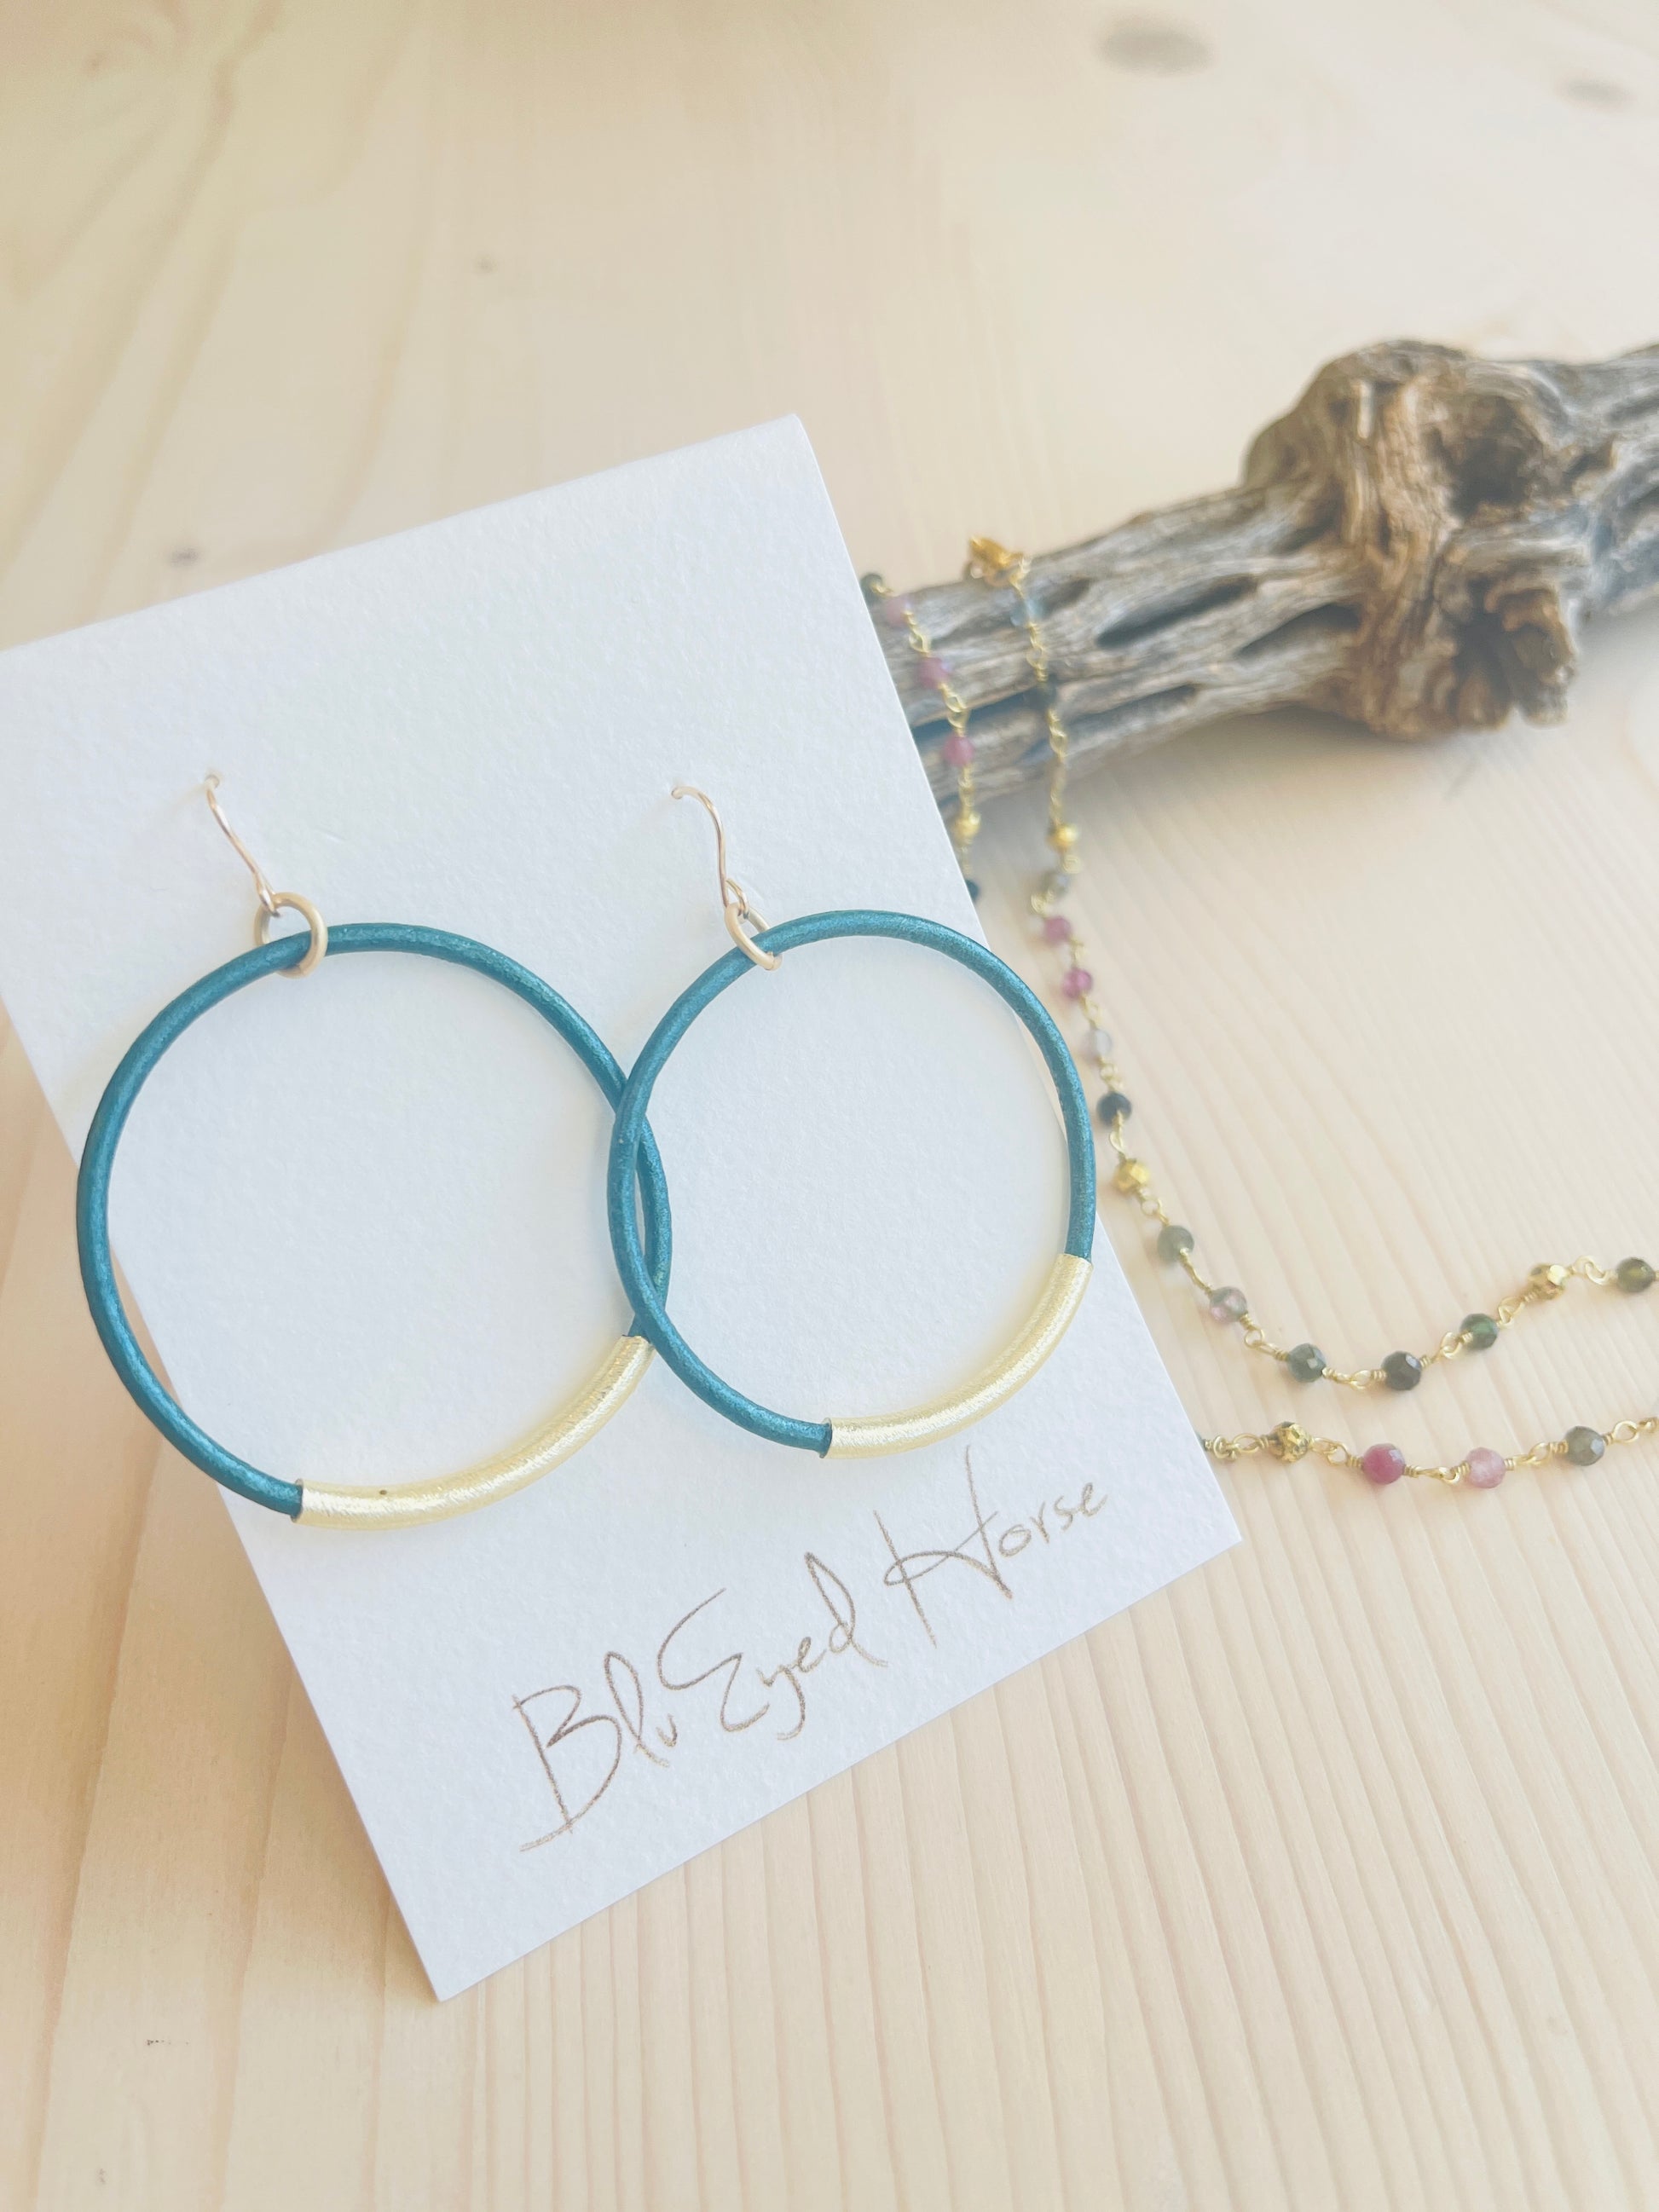 Teal Leather Hoops and multi colored stone necklace with driftwood in background